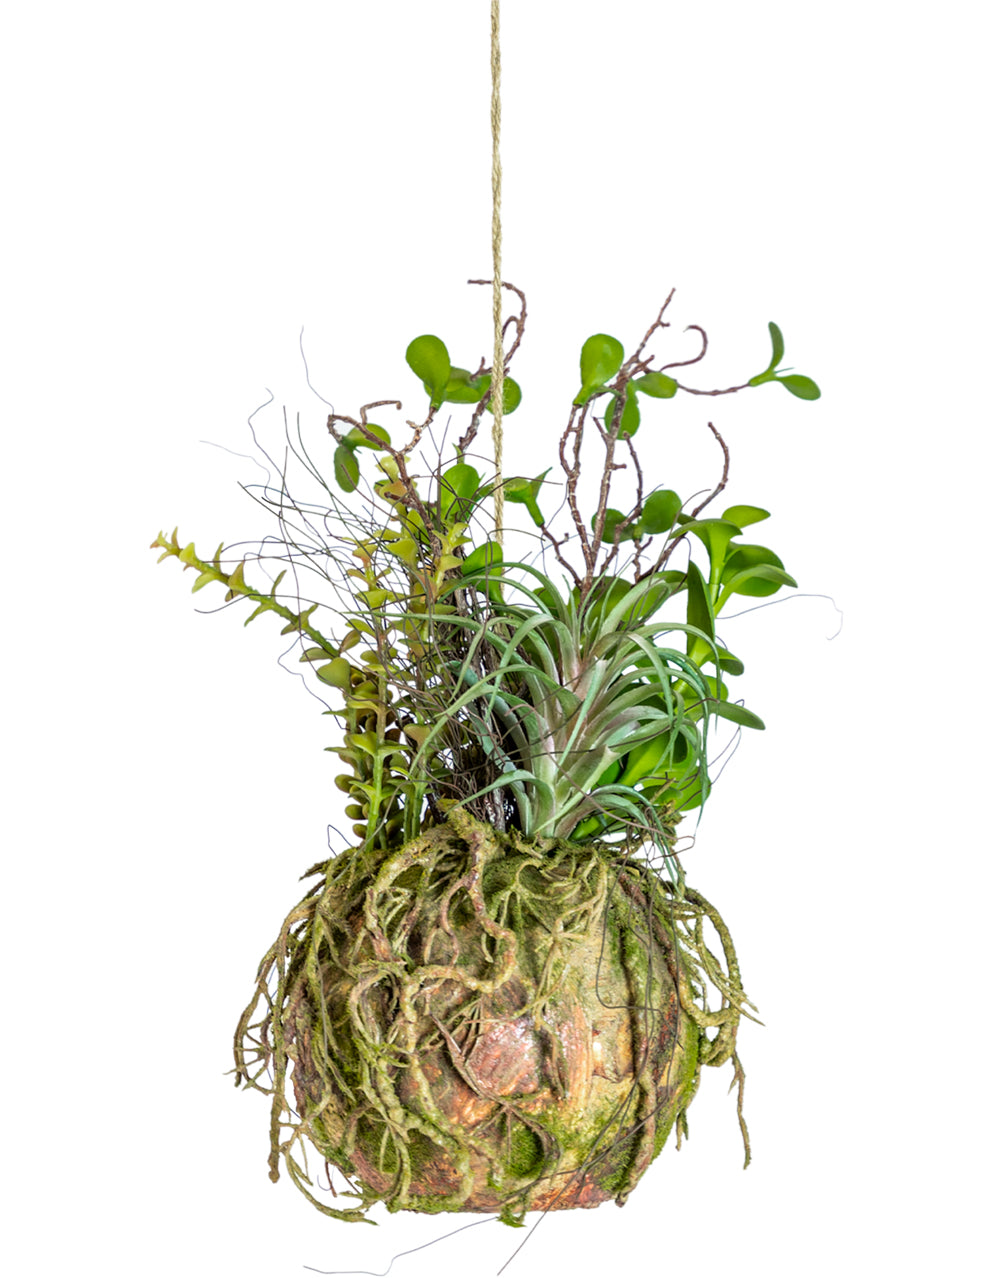 Ornamental Hanging Moss Ball with Succulent Plants